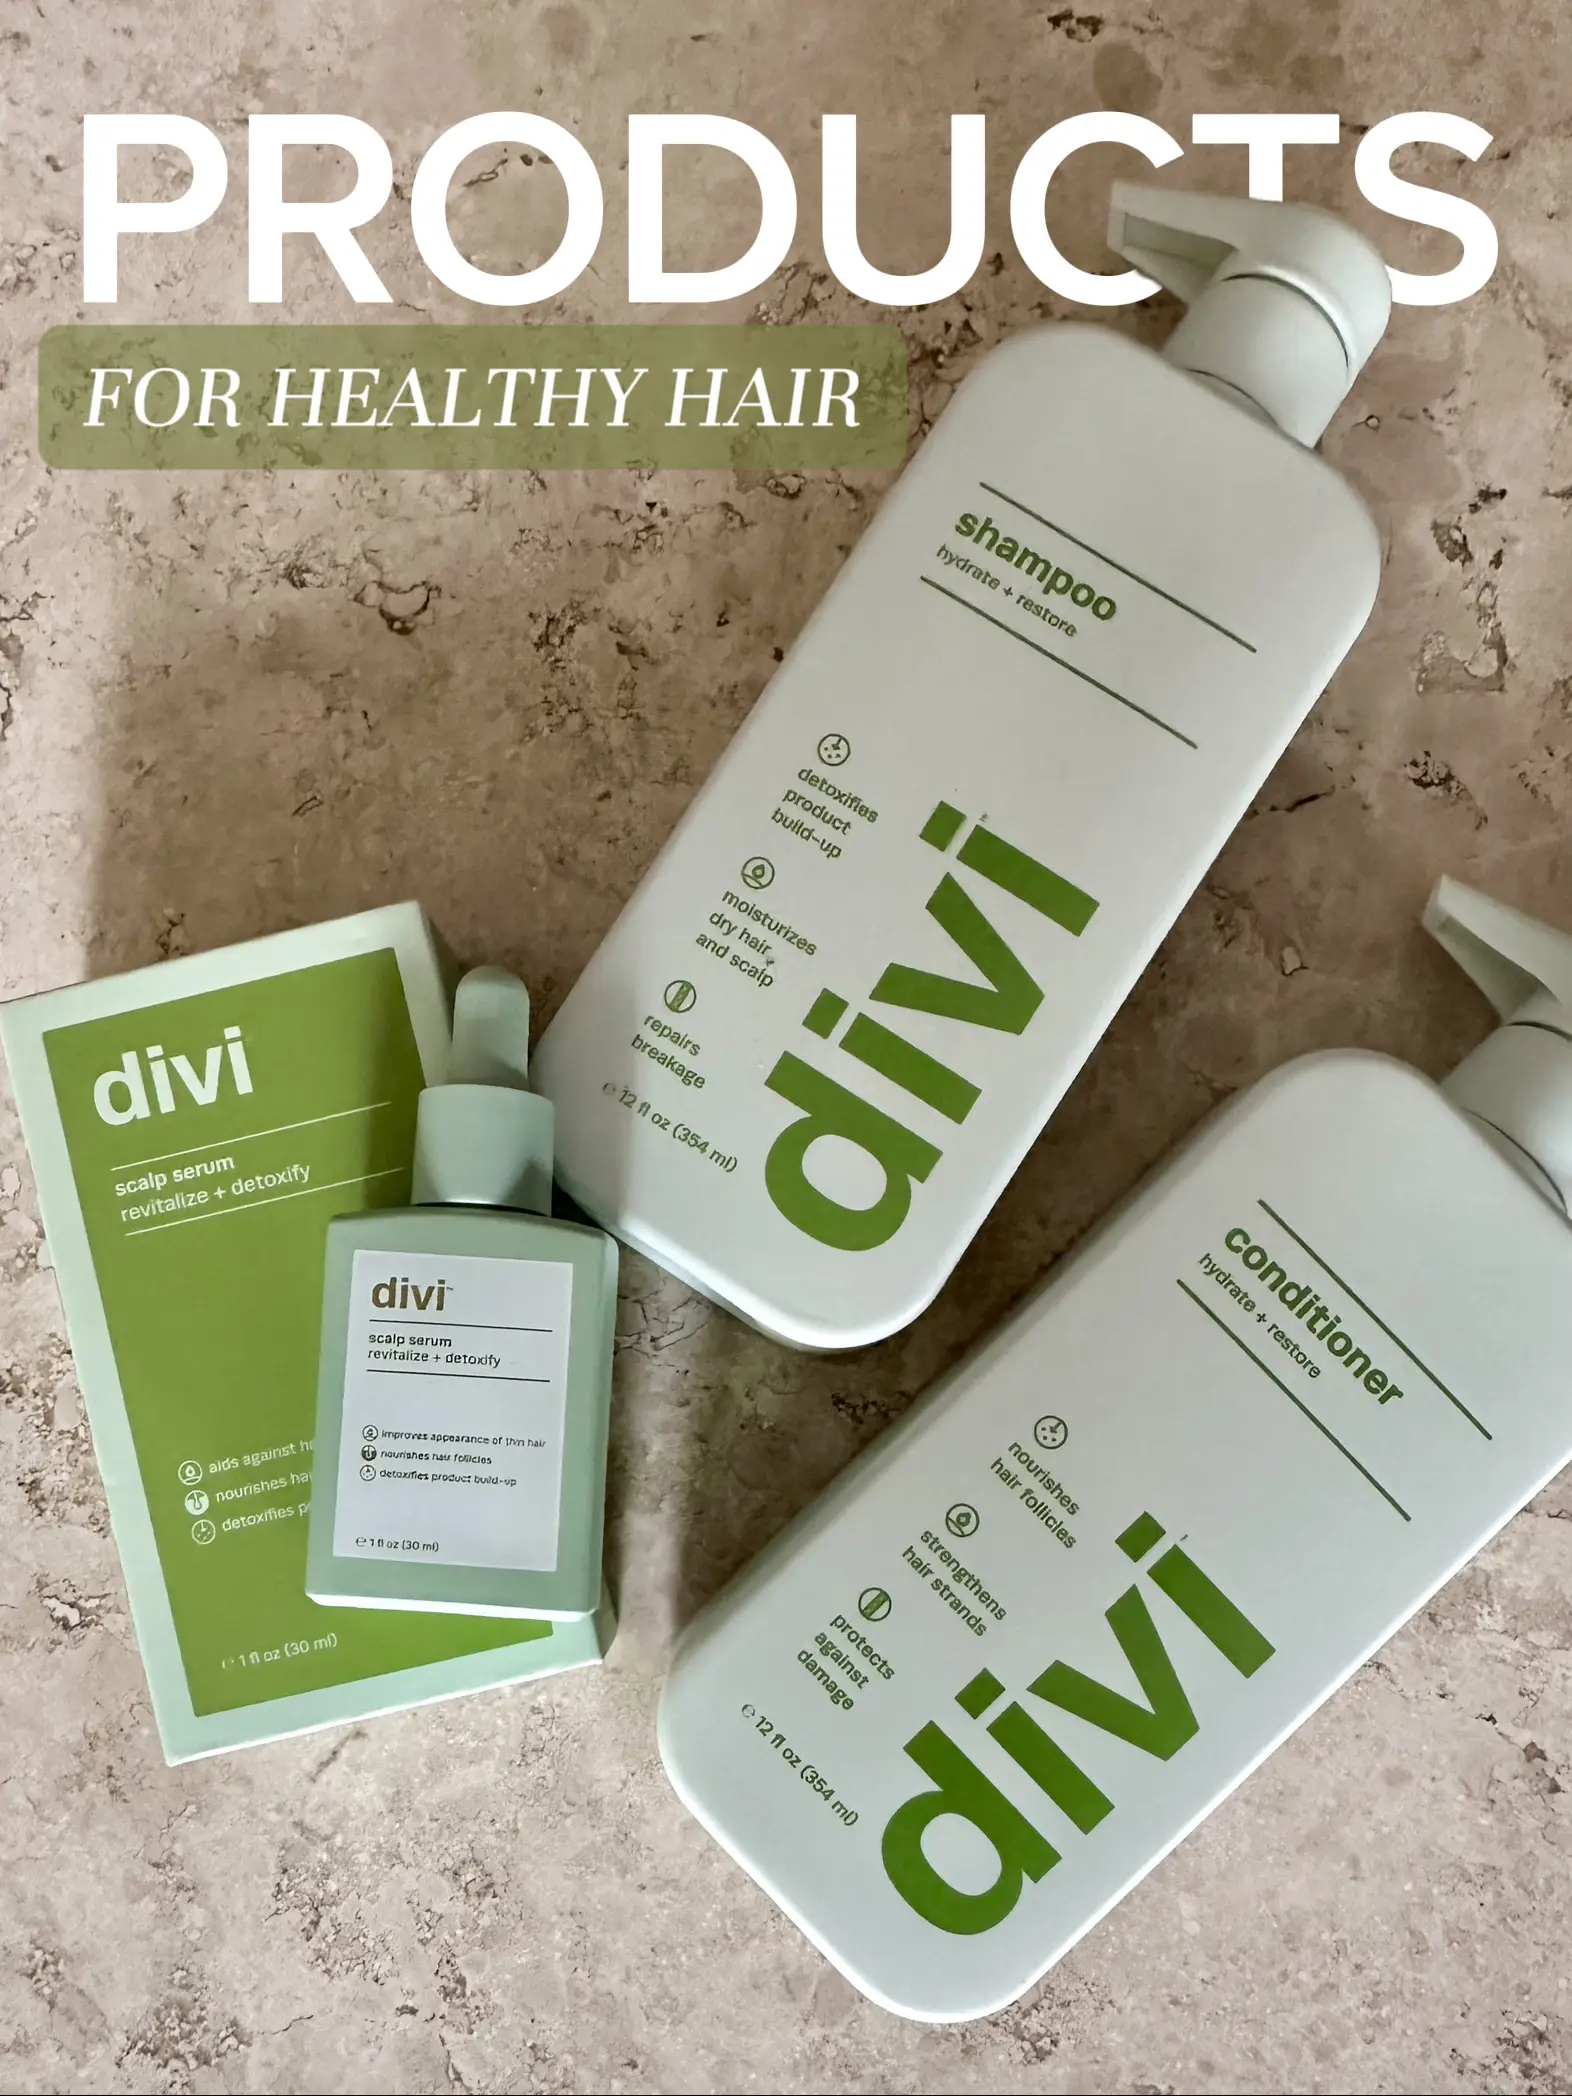 divi Scalp Serum, Revitalize and Detoxify, Aids against hair-thinning,  nourishes hair follicles, detoxifies product build-up (30 ml) 